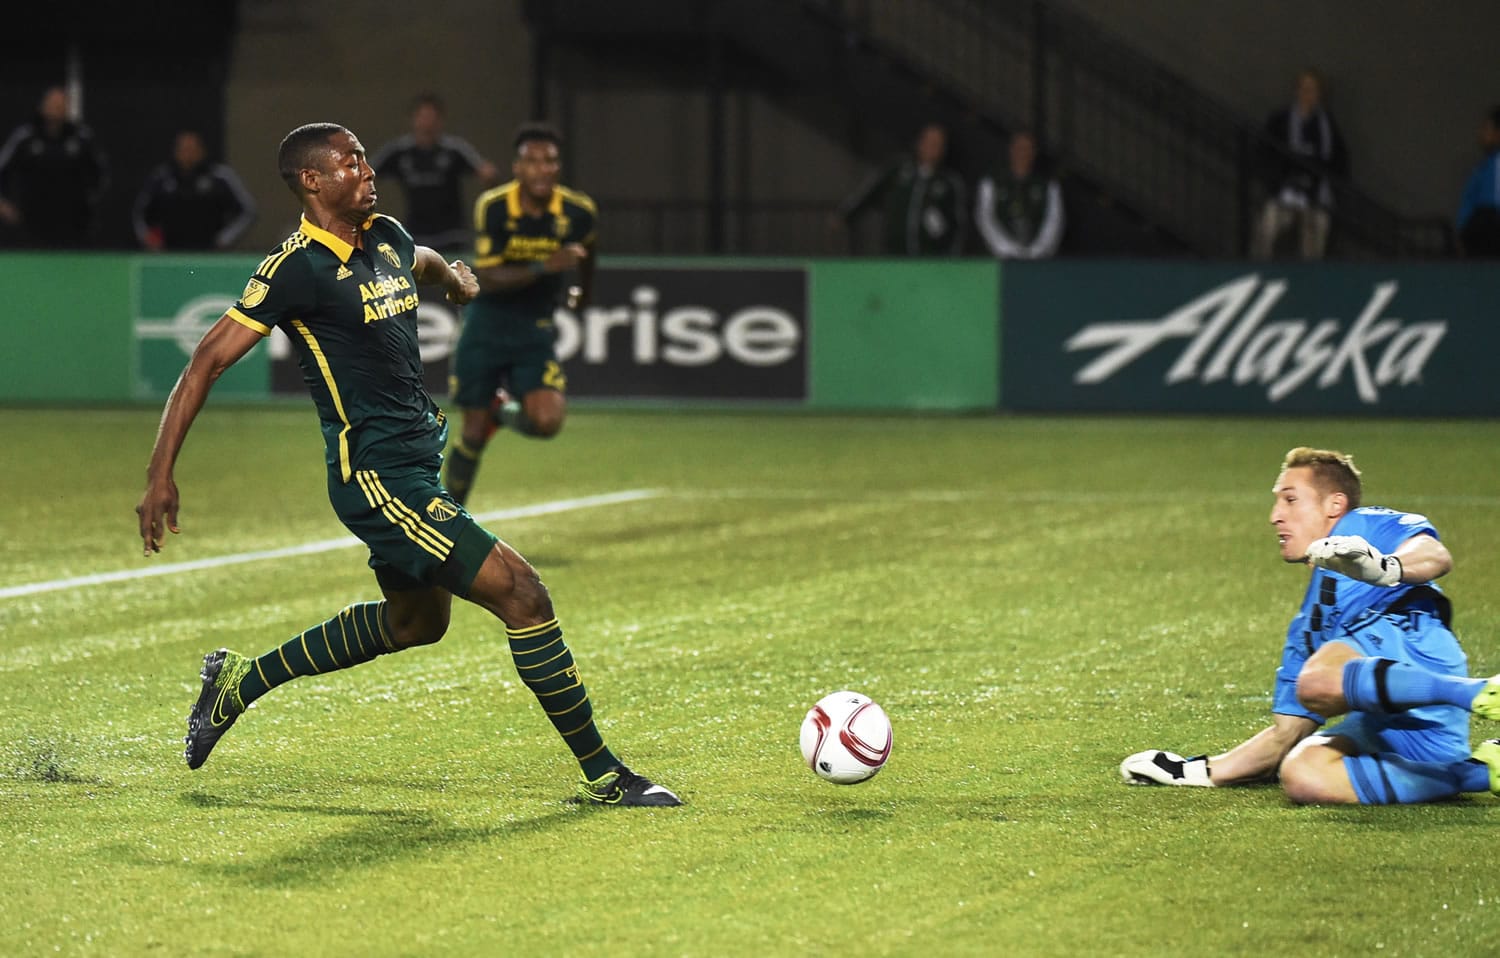 Sporting KC goalkeeper Tim Melia (29) goes after a ball as Portland Timbers forward Fanendo Adi (9) closes in during the first half of a knockout round MLS playoff soccer match in Portland, Ore. on Thursday, Oct. 29, 2015.